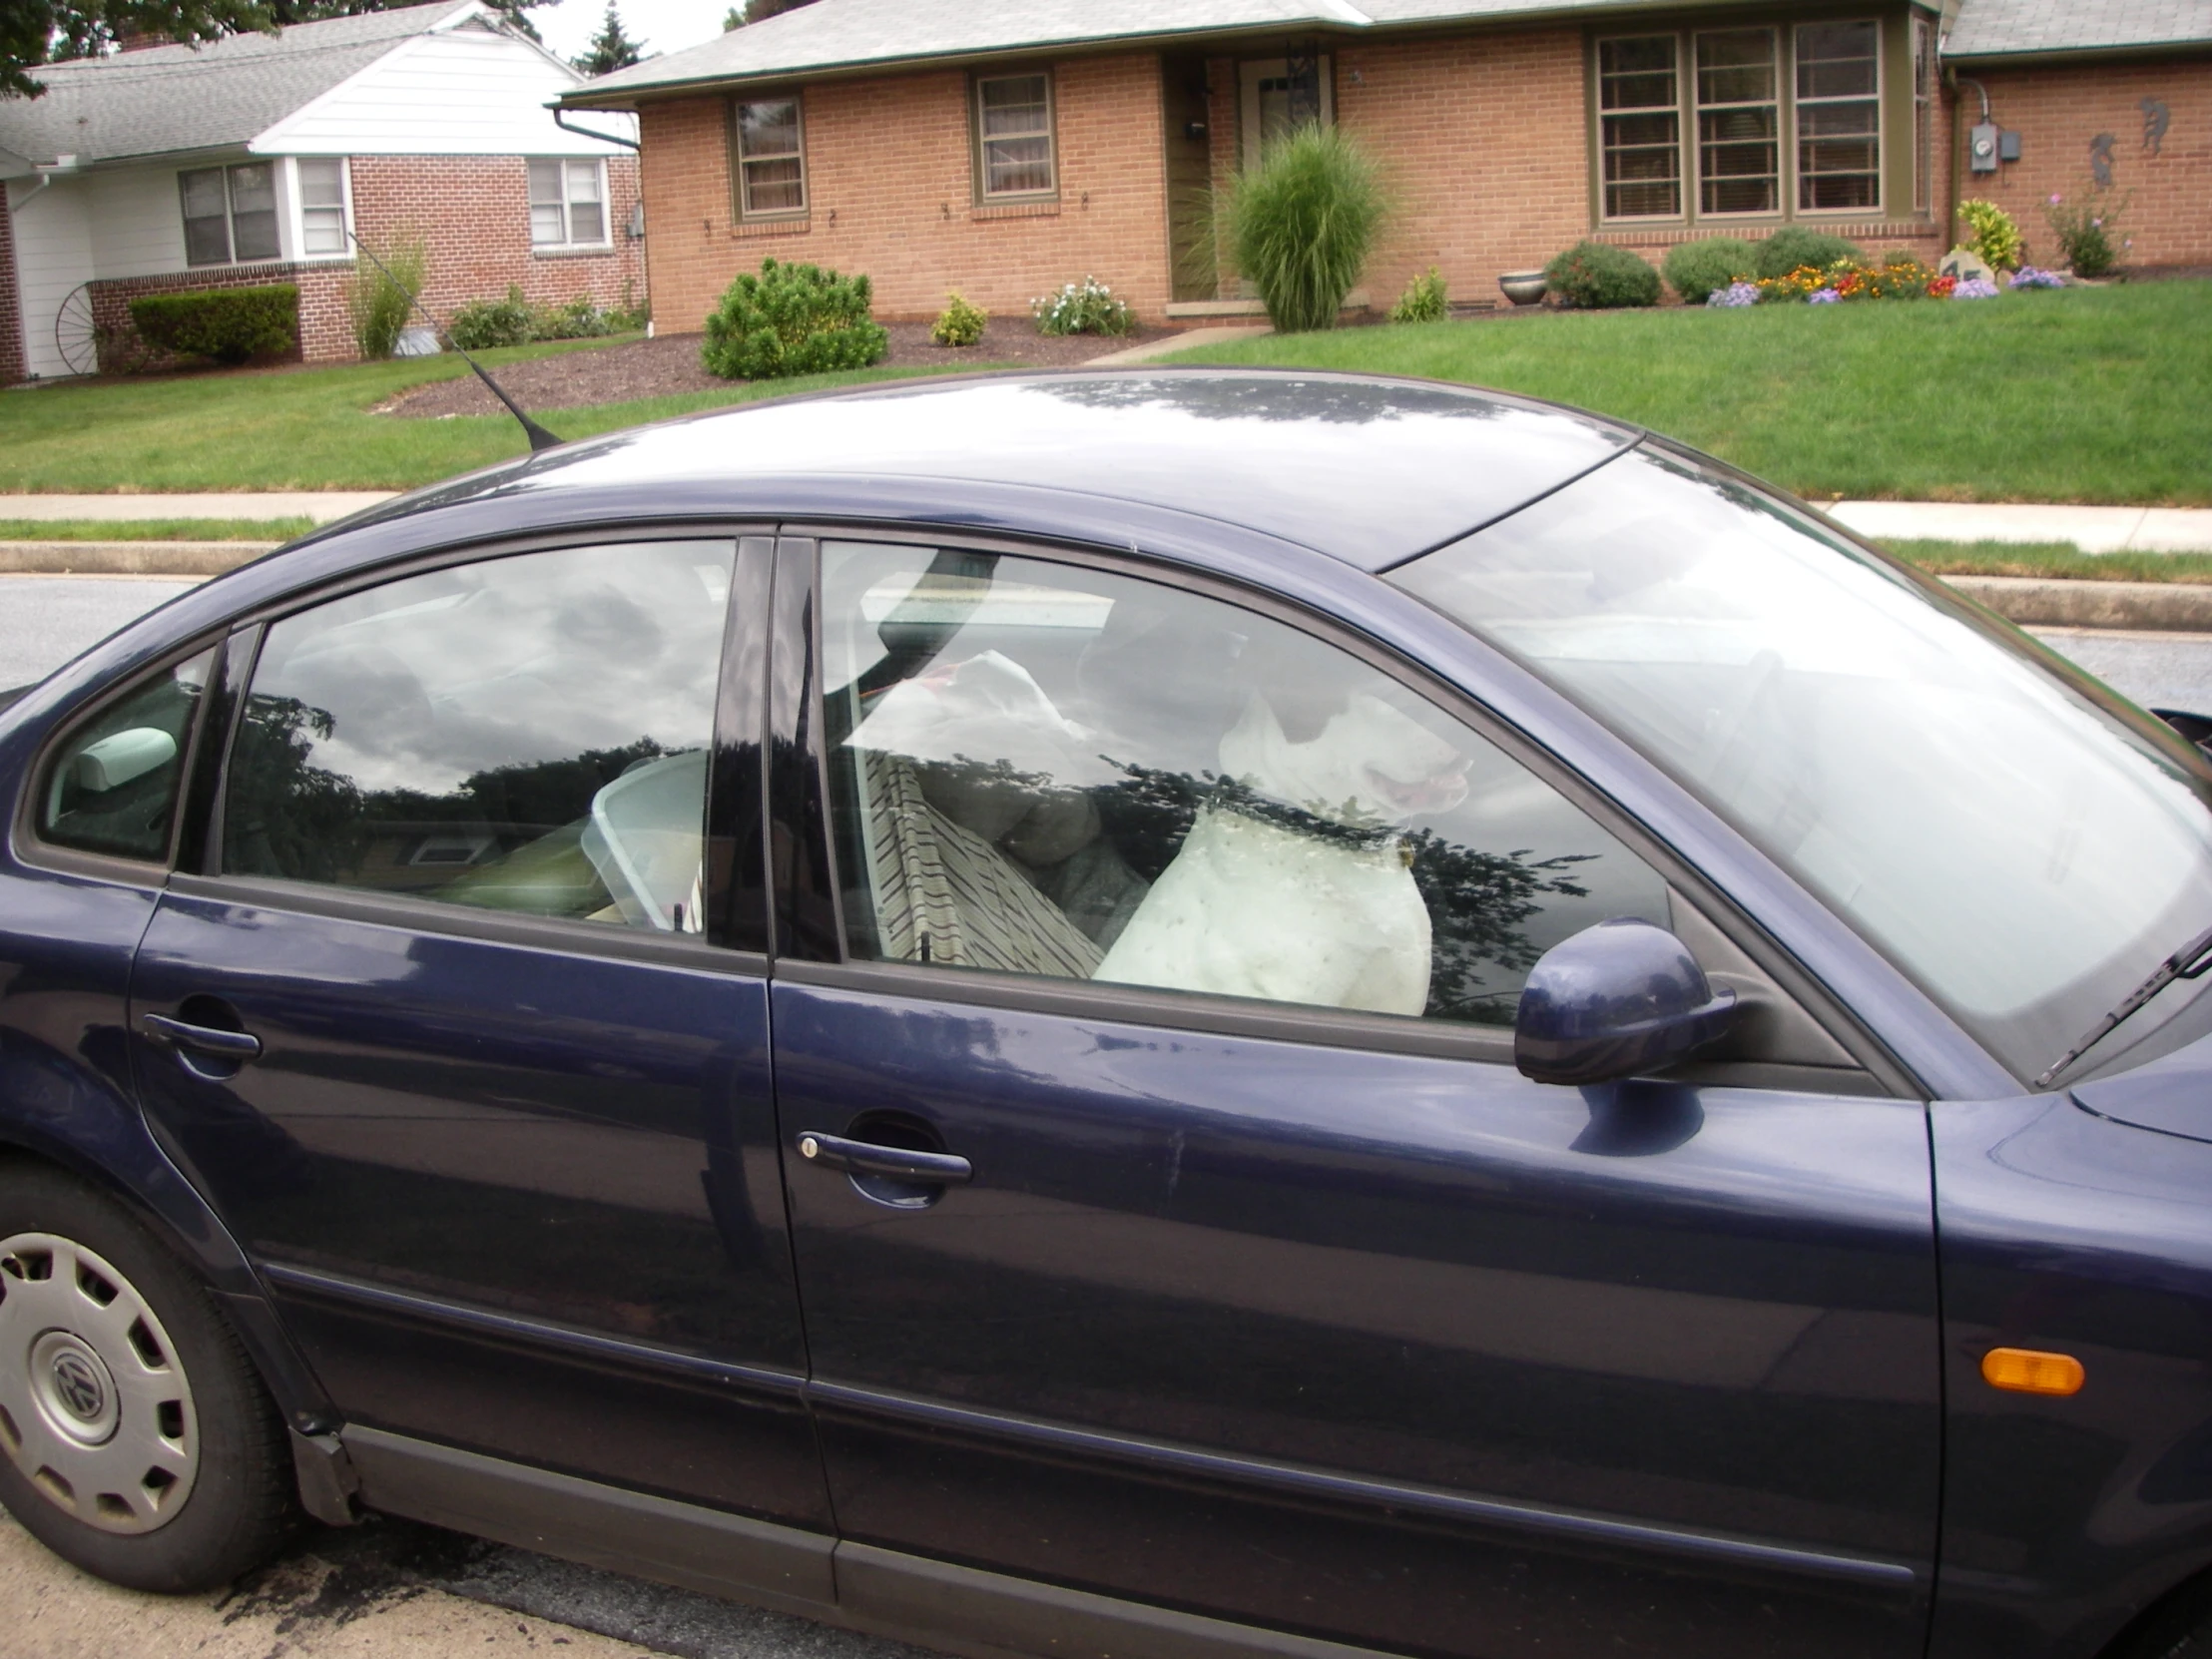 a car with windows partially open parked in front of a house